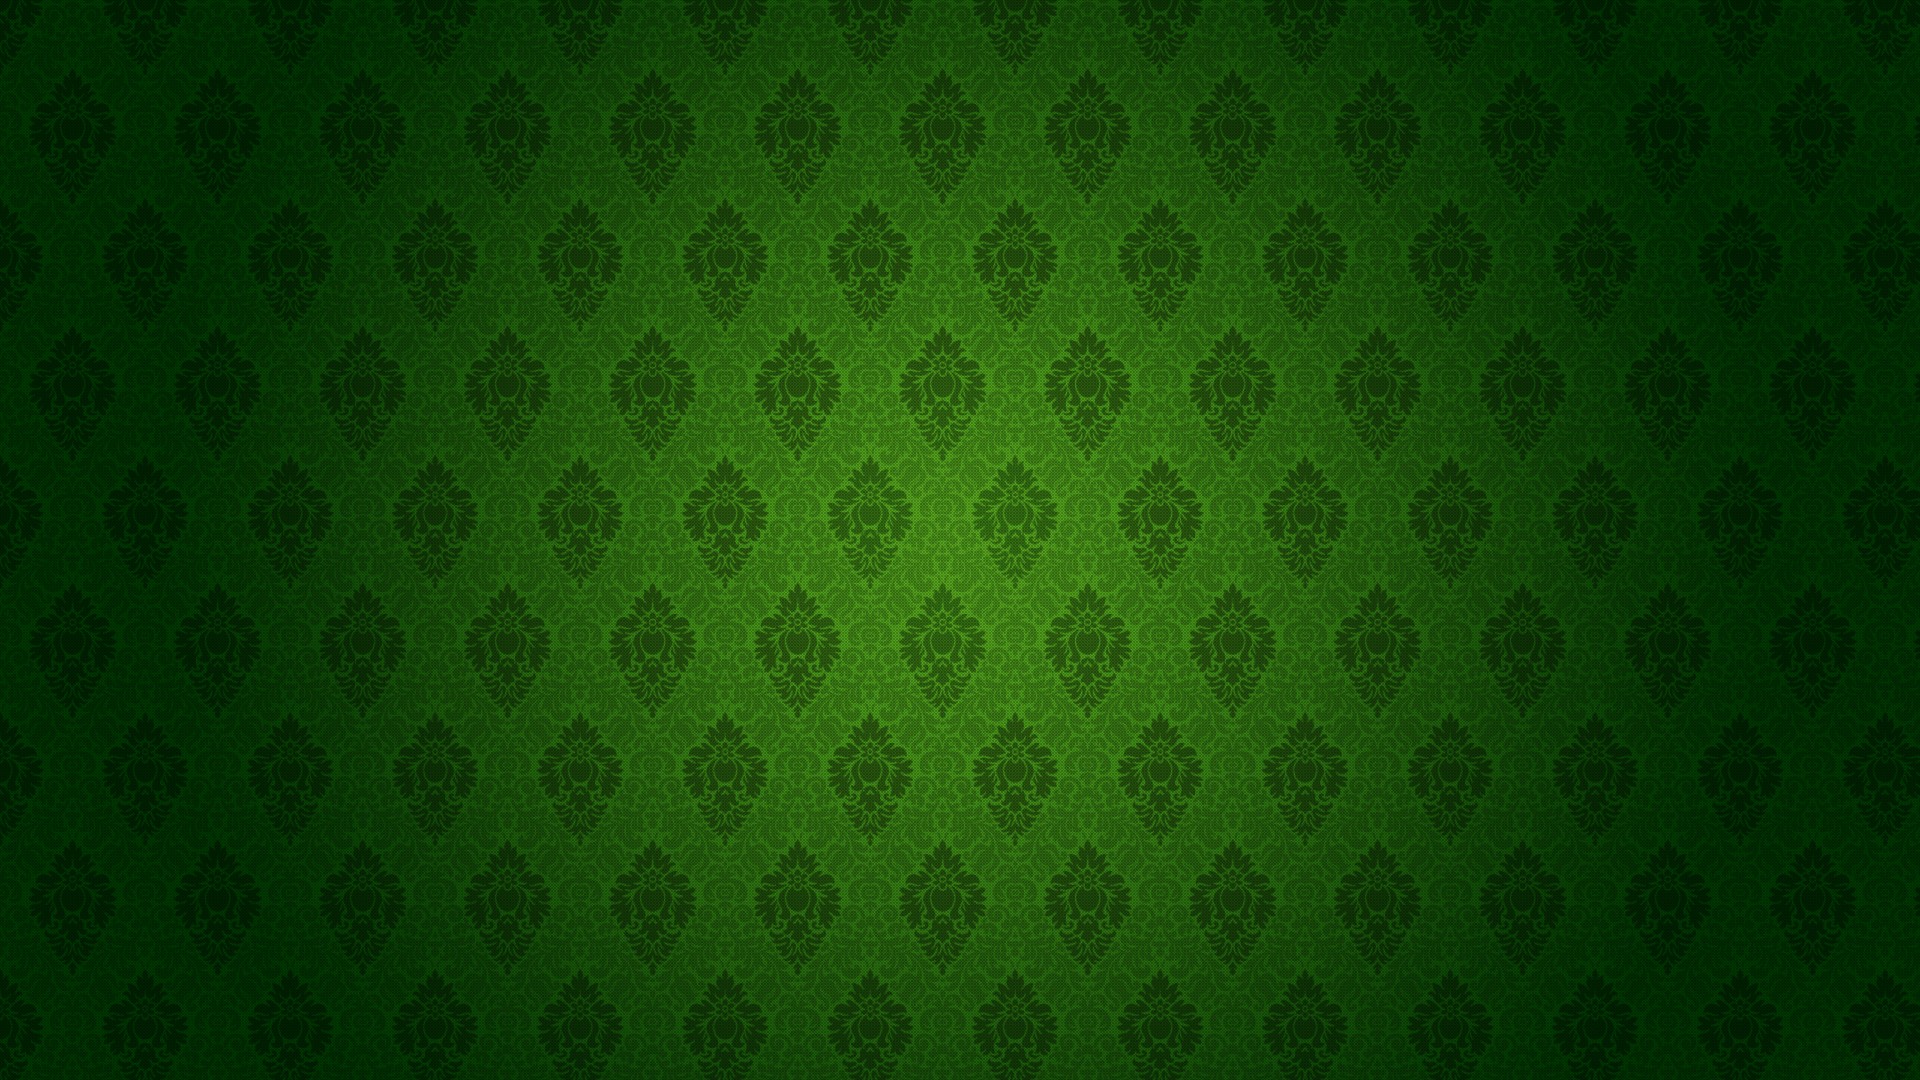 Green background wallpapers hd - shorX